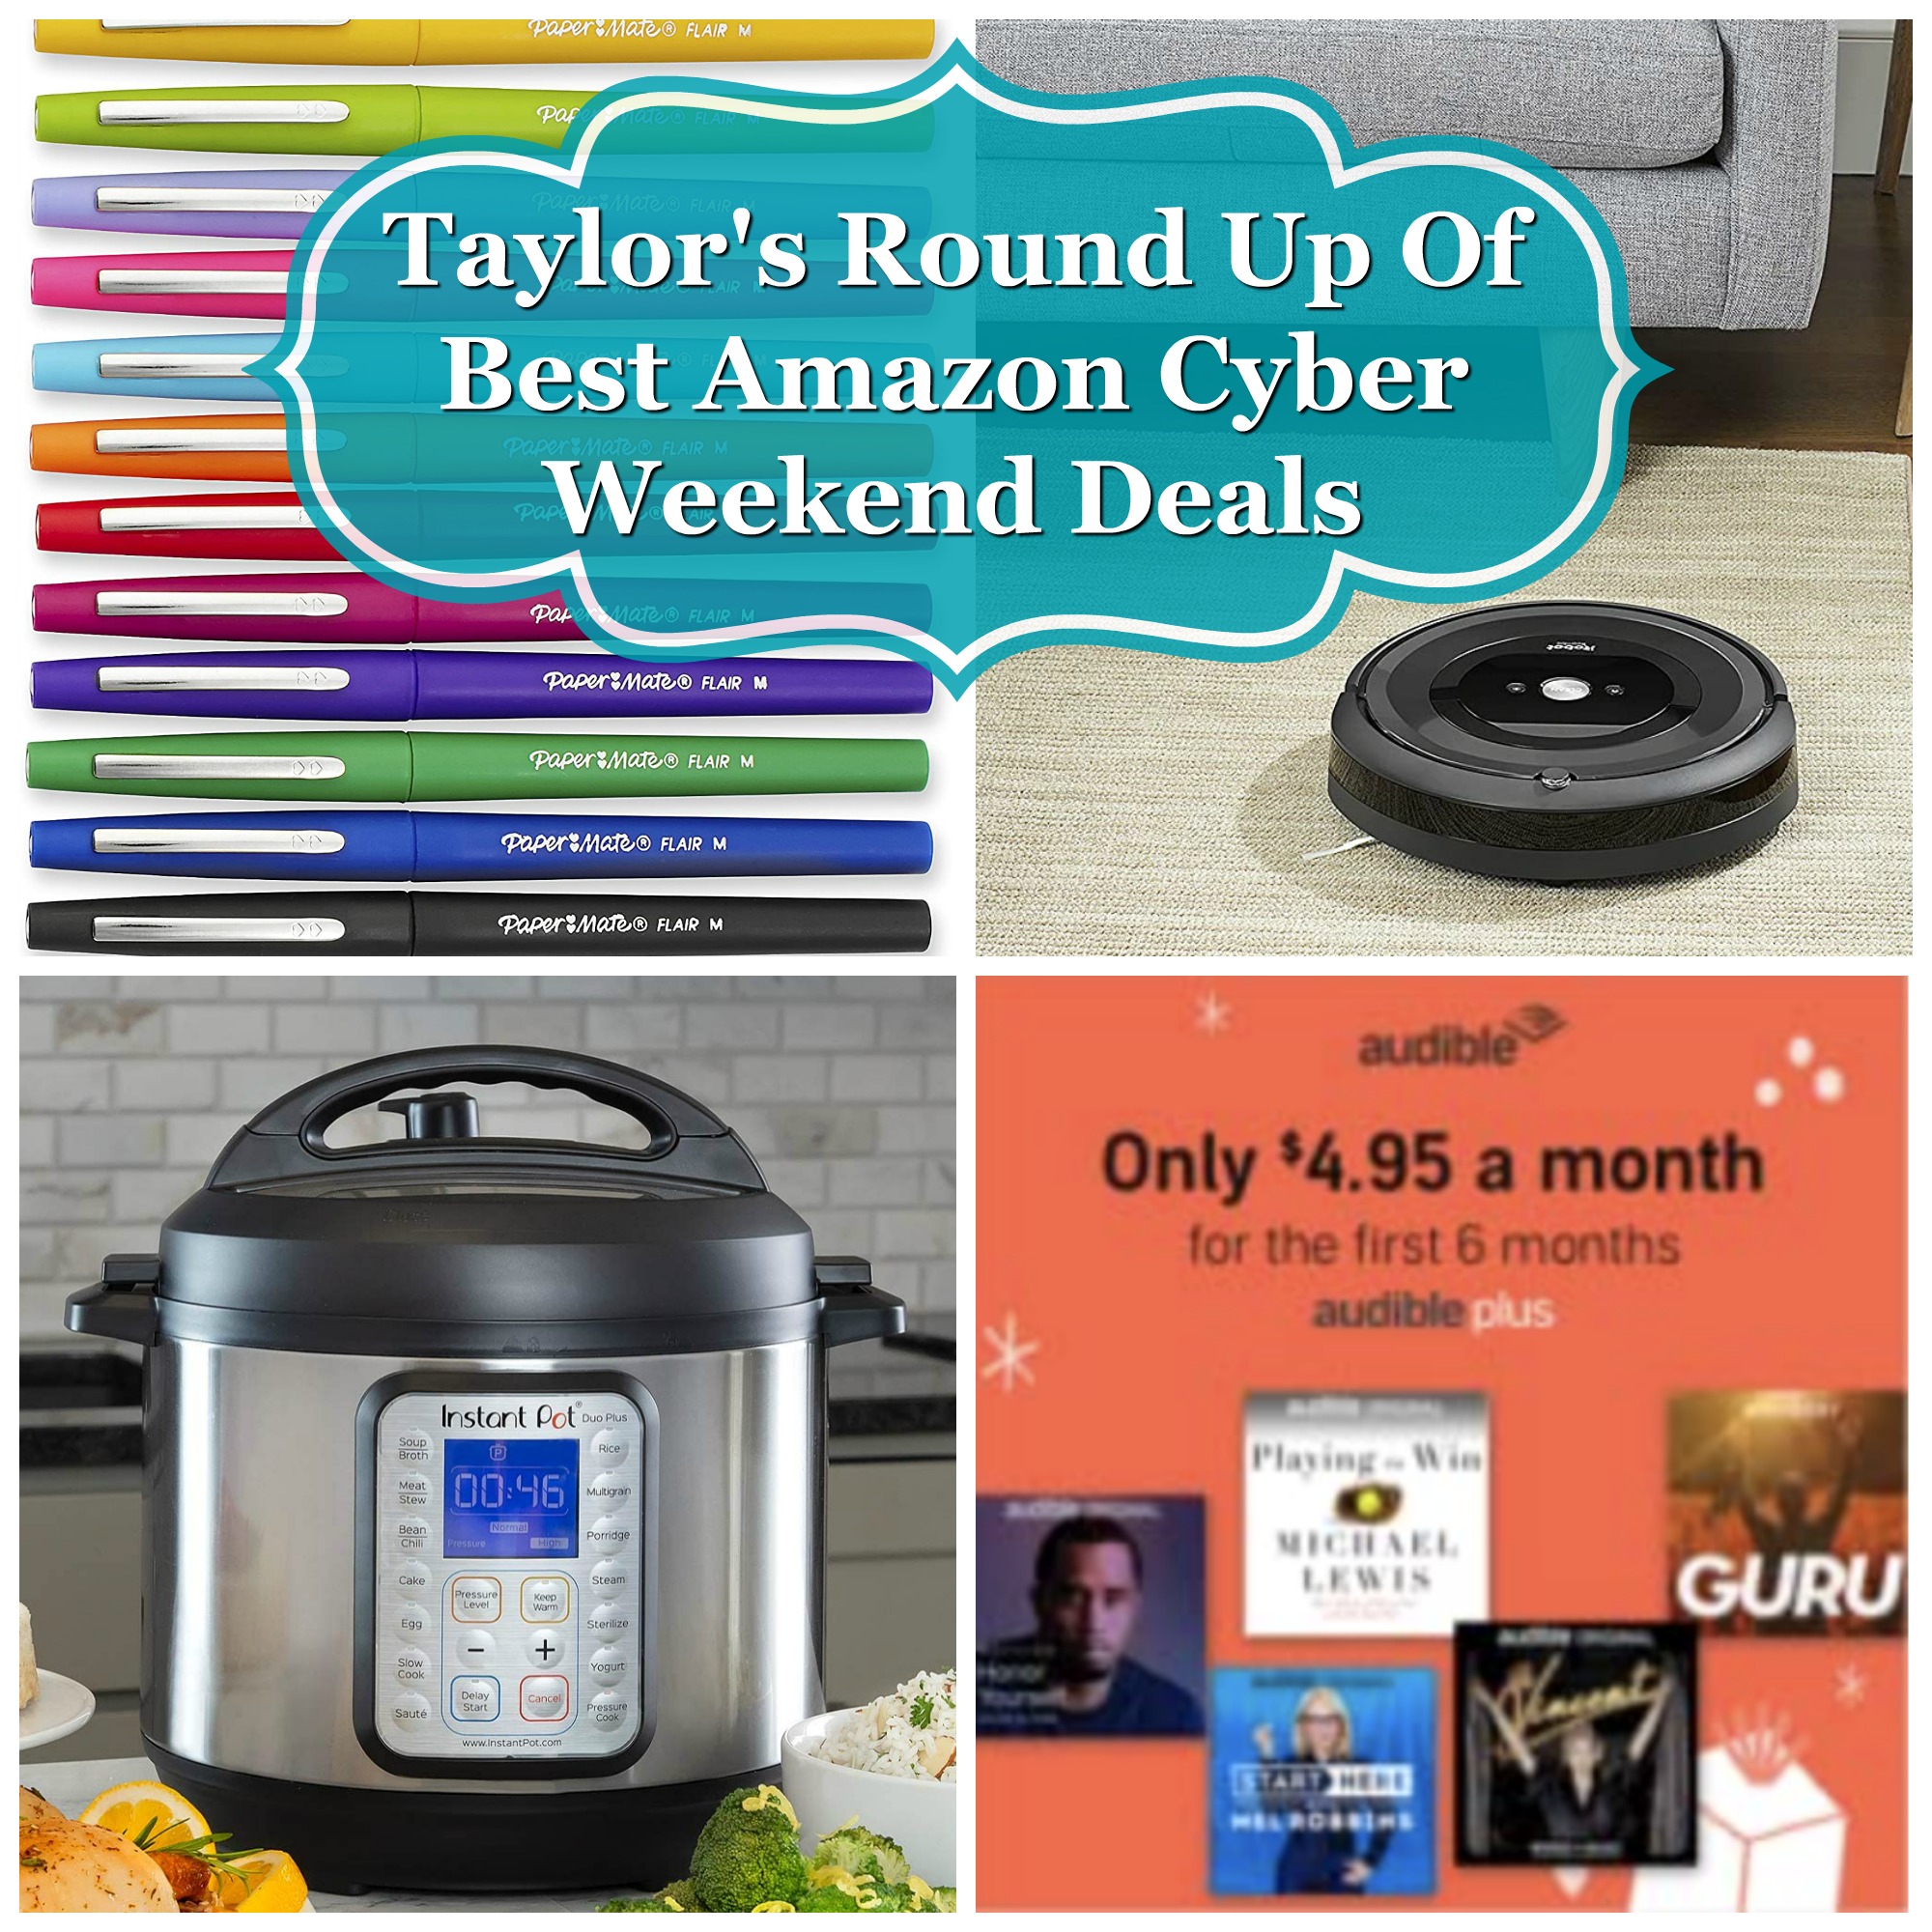 Taylor's round up of best Amazon Cyber Weekend deals